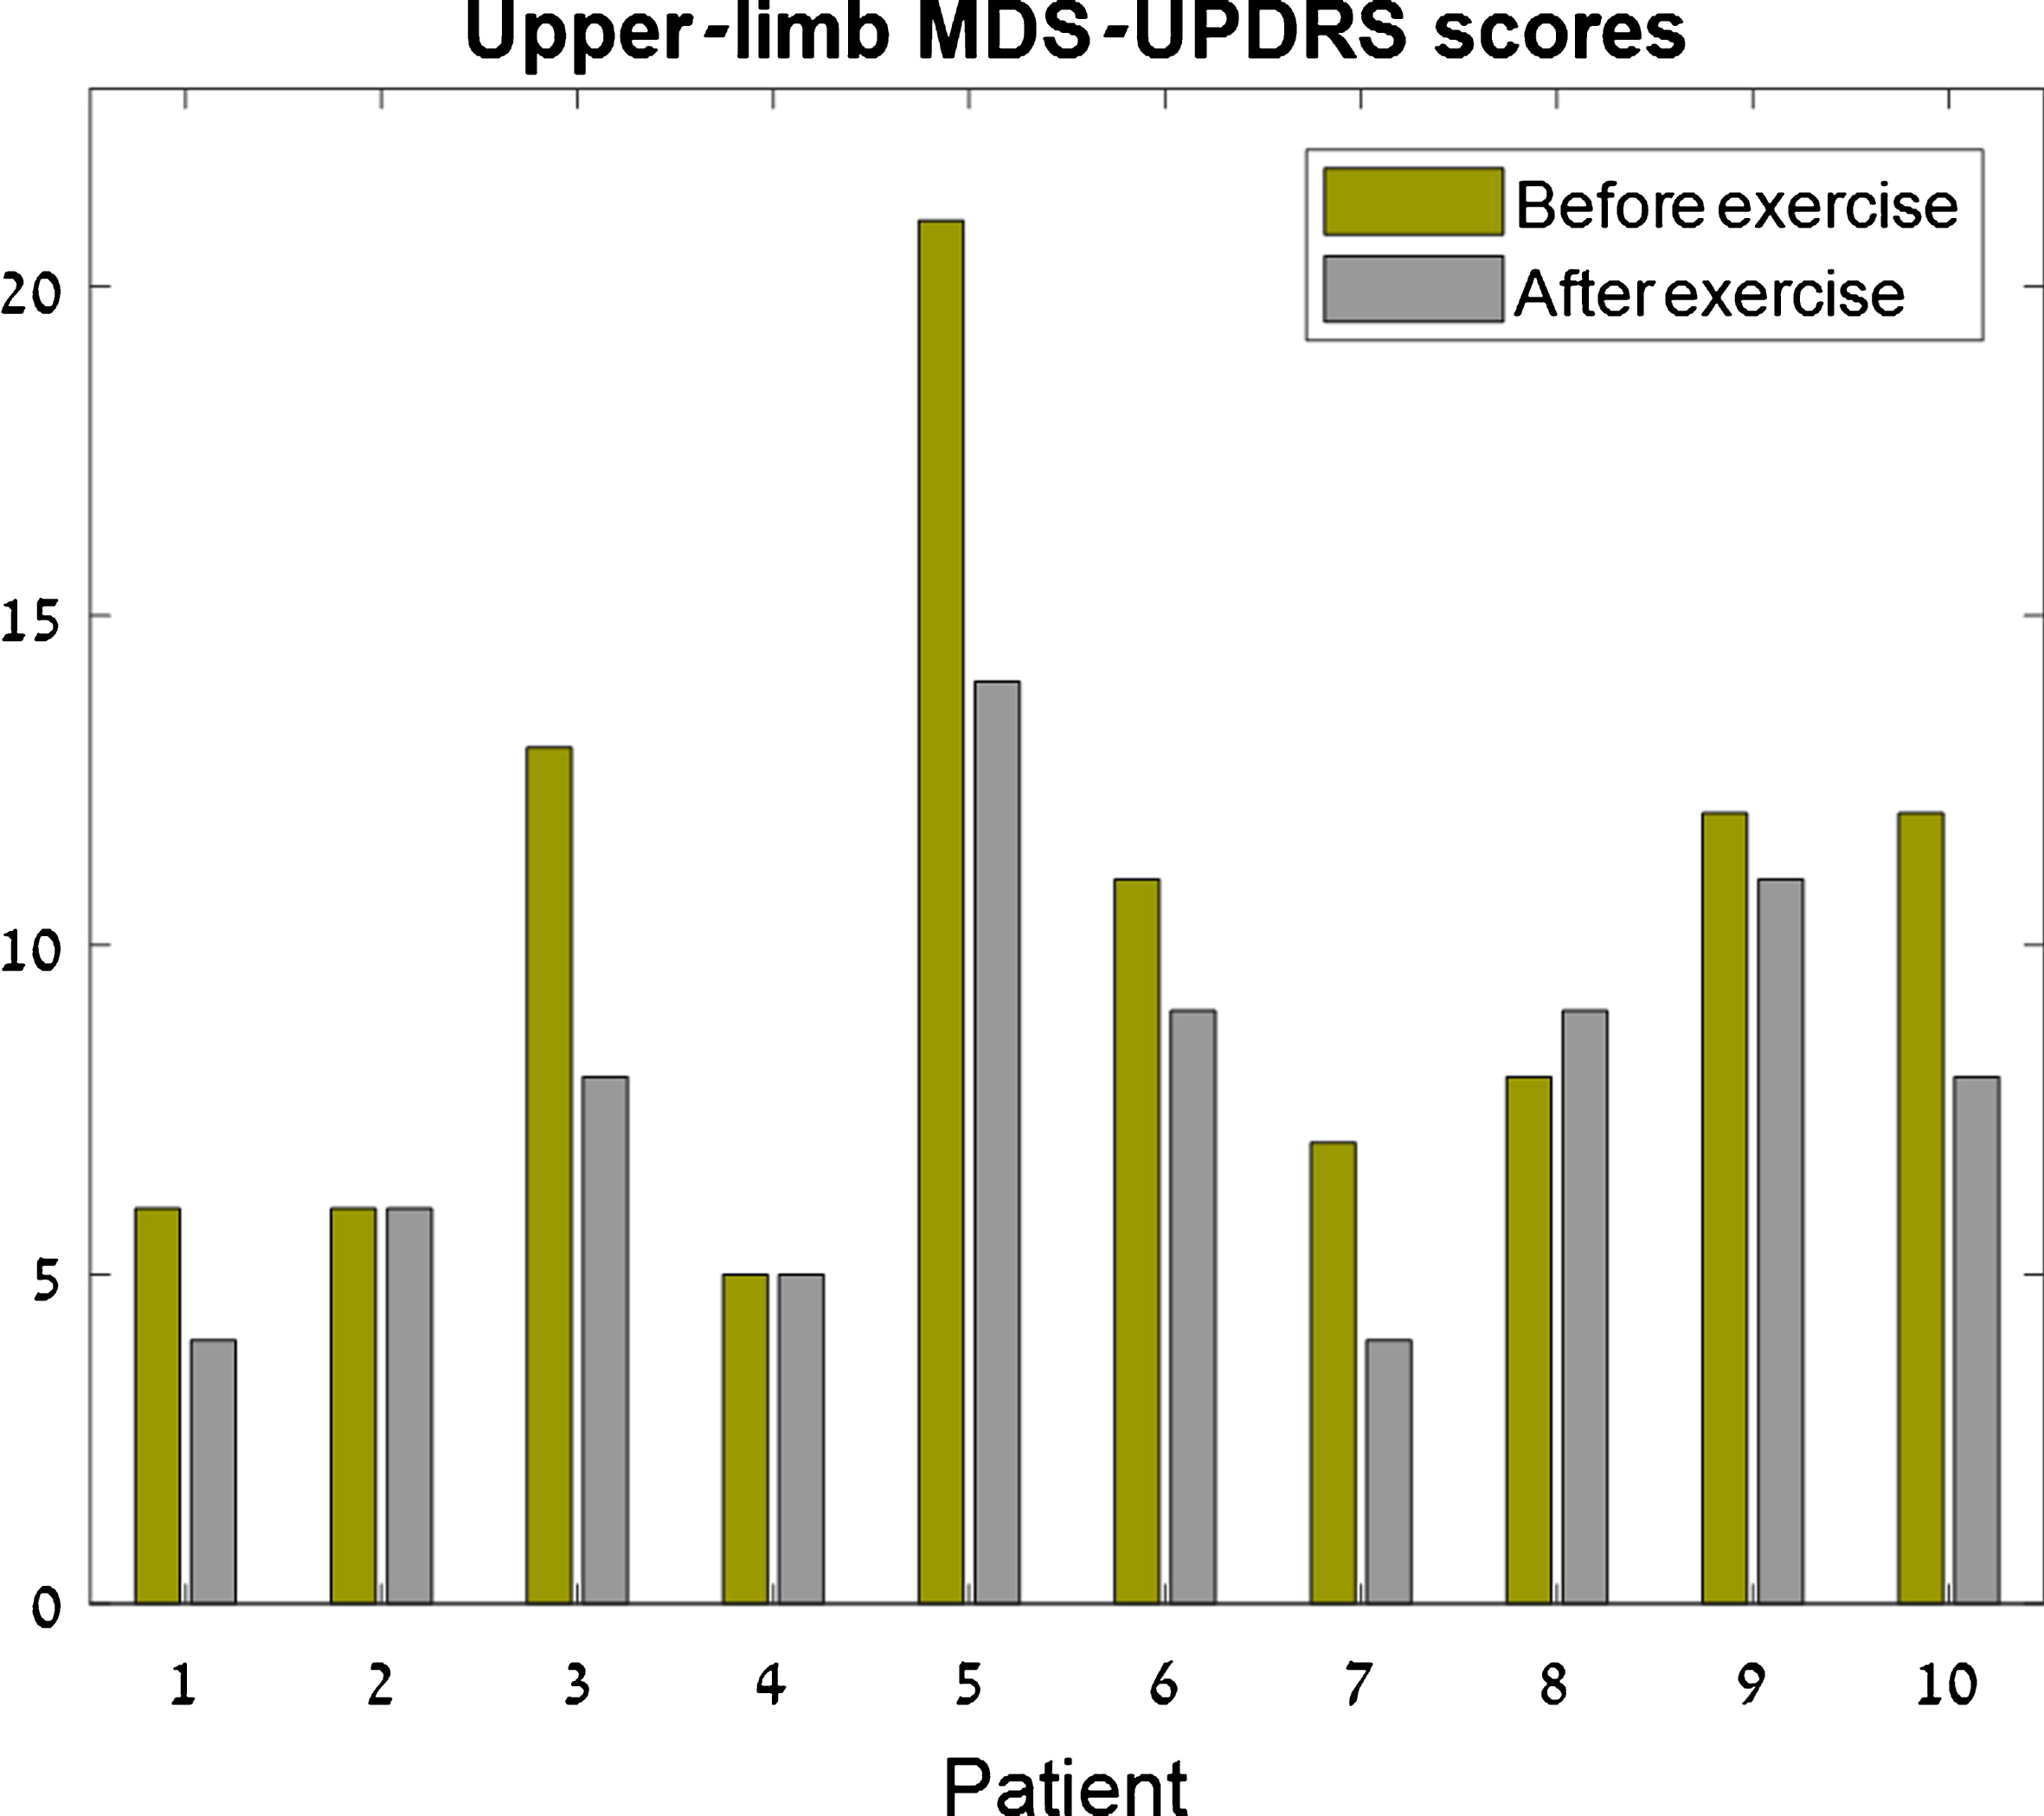 Upper-limb MDS-UPDRS scores. For each patient, the left bar (green) represents the clinical score before the exercise and the right bar (gray) represents the clinical score after the exercise. Seven patients had improved (lower) scores following the exercise, two maintained the same score, and one patient had a 1-point worsening of the score.